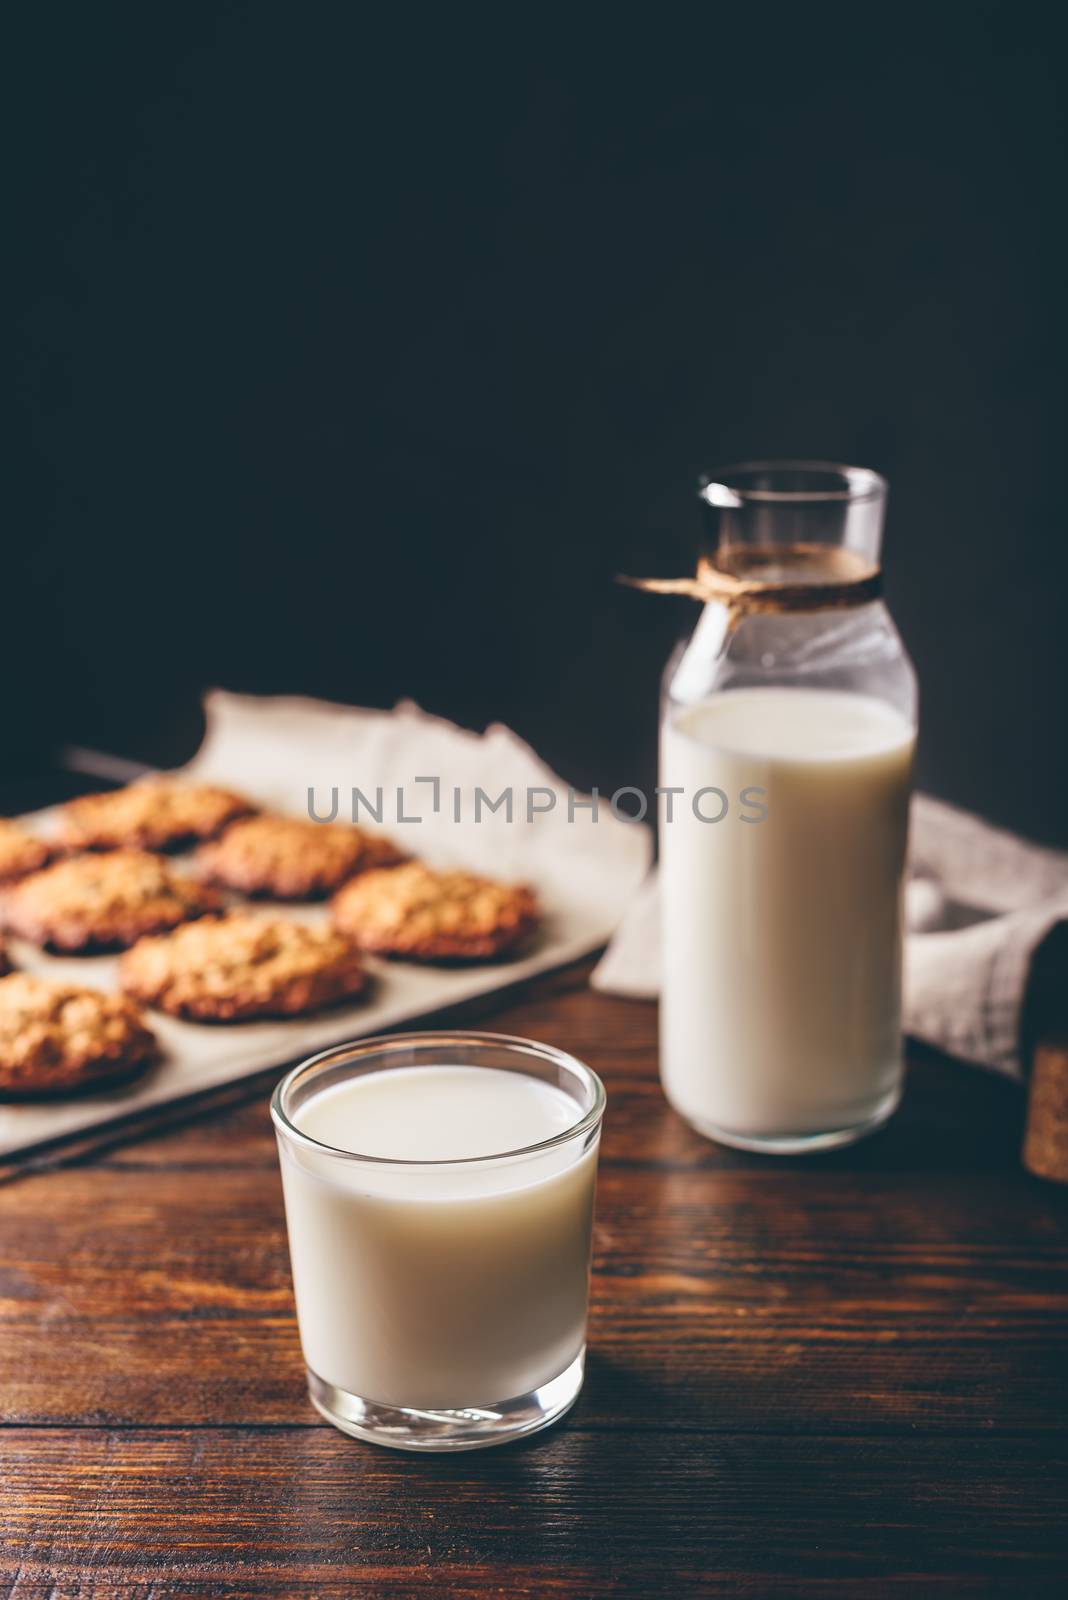 Glass of Milk with Bottle and Oatmeal Cookies on Parchment Paper. Copy Space on the Top.